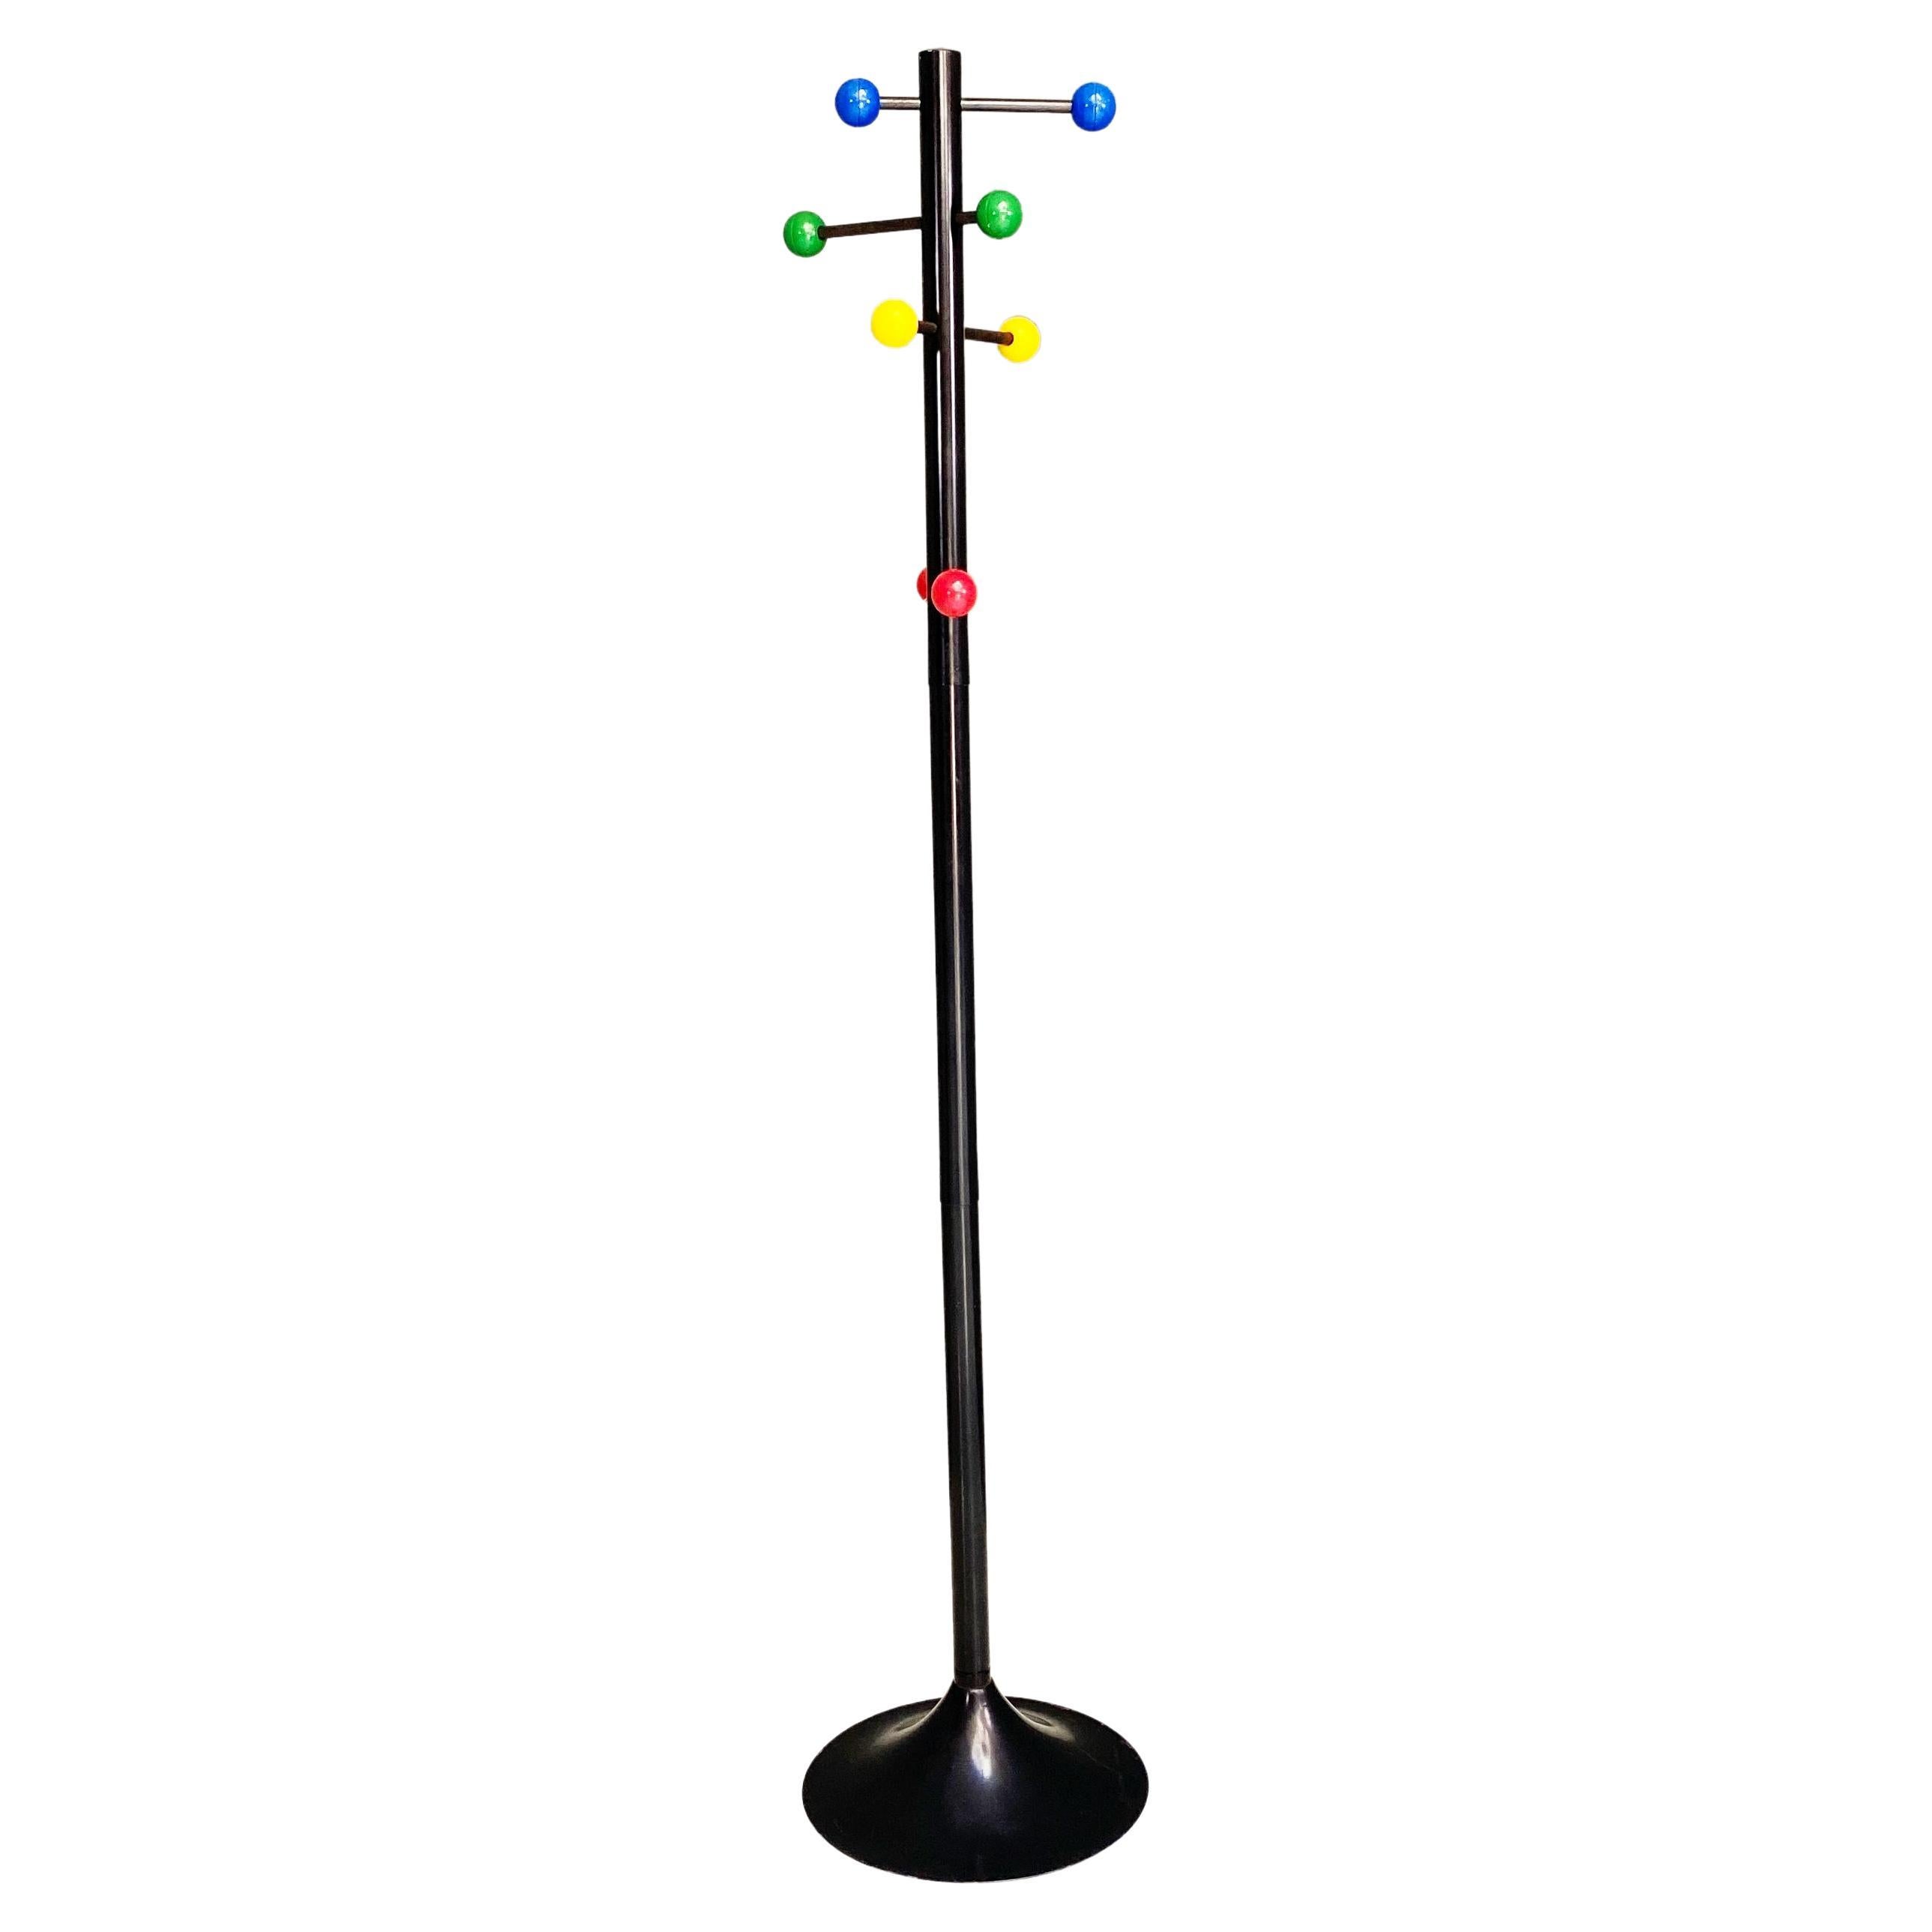 Italian Mid-Century Modern Metal Coat Rack with Colored Spheres, 1980s For Sale